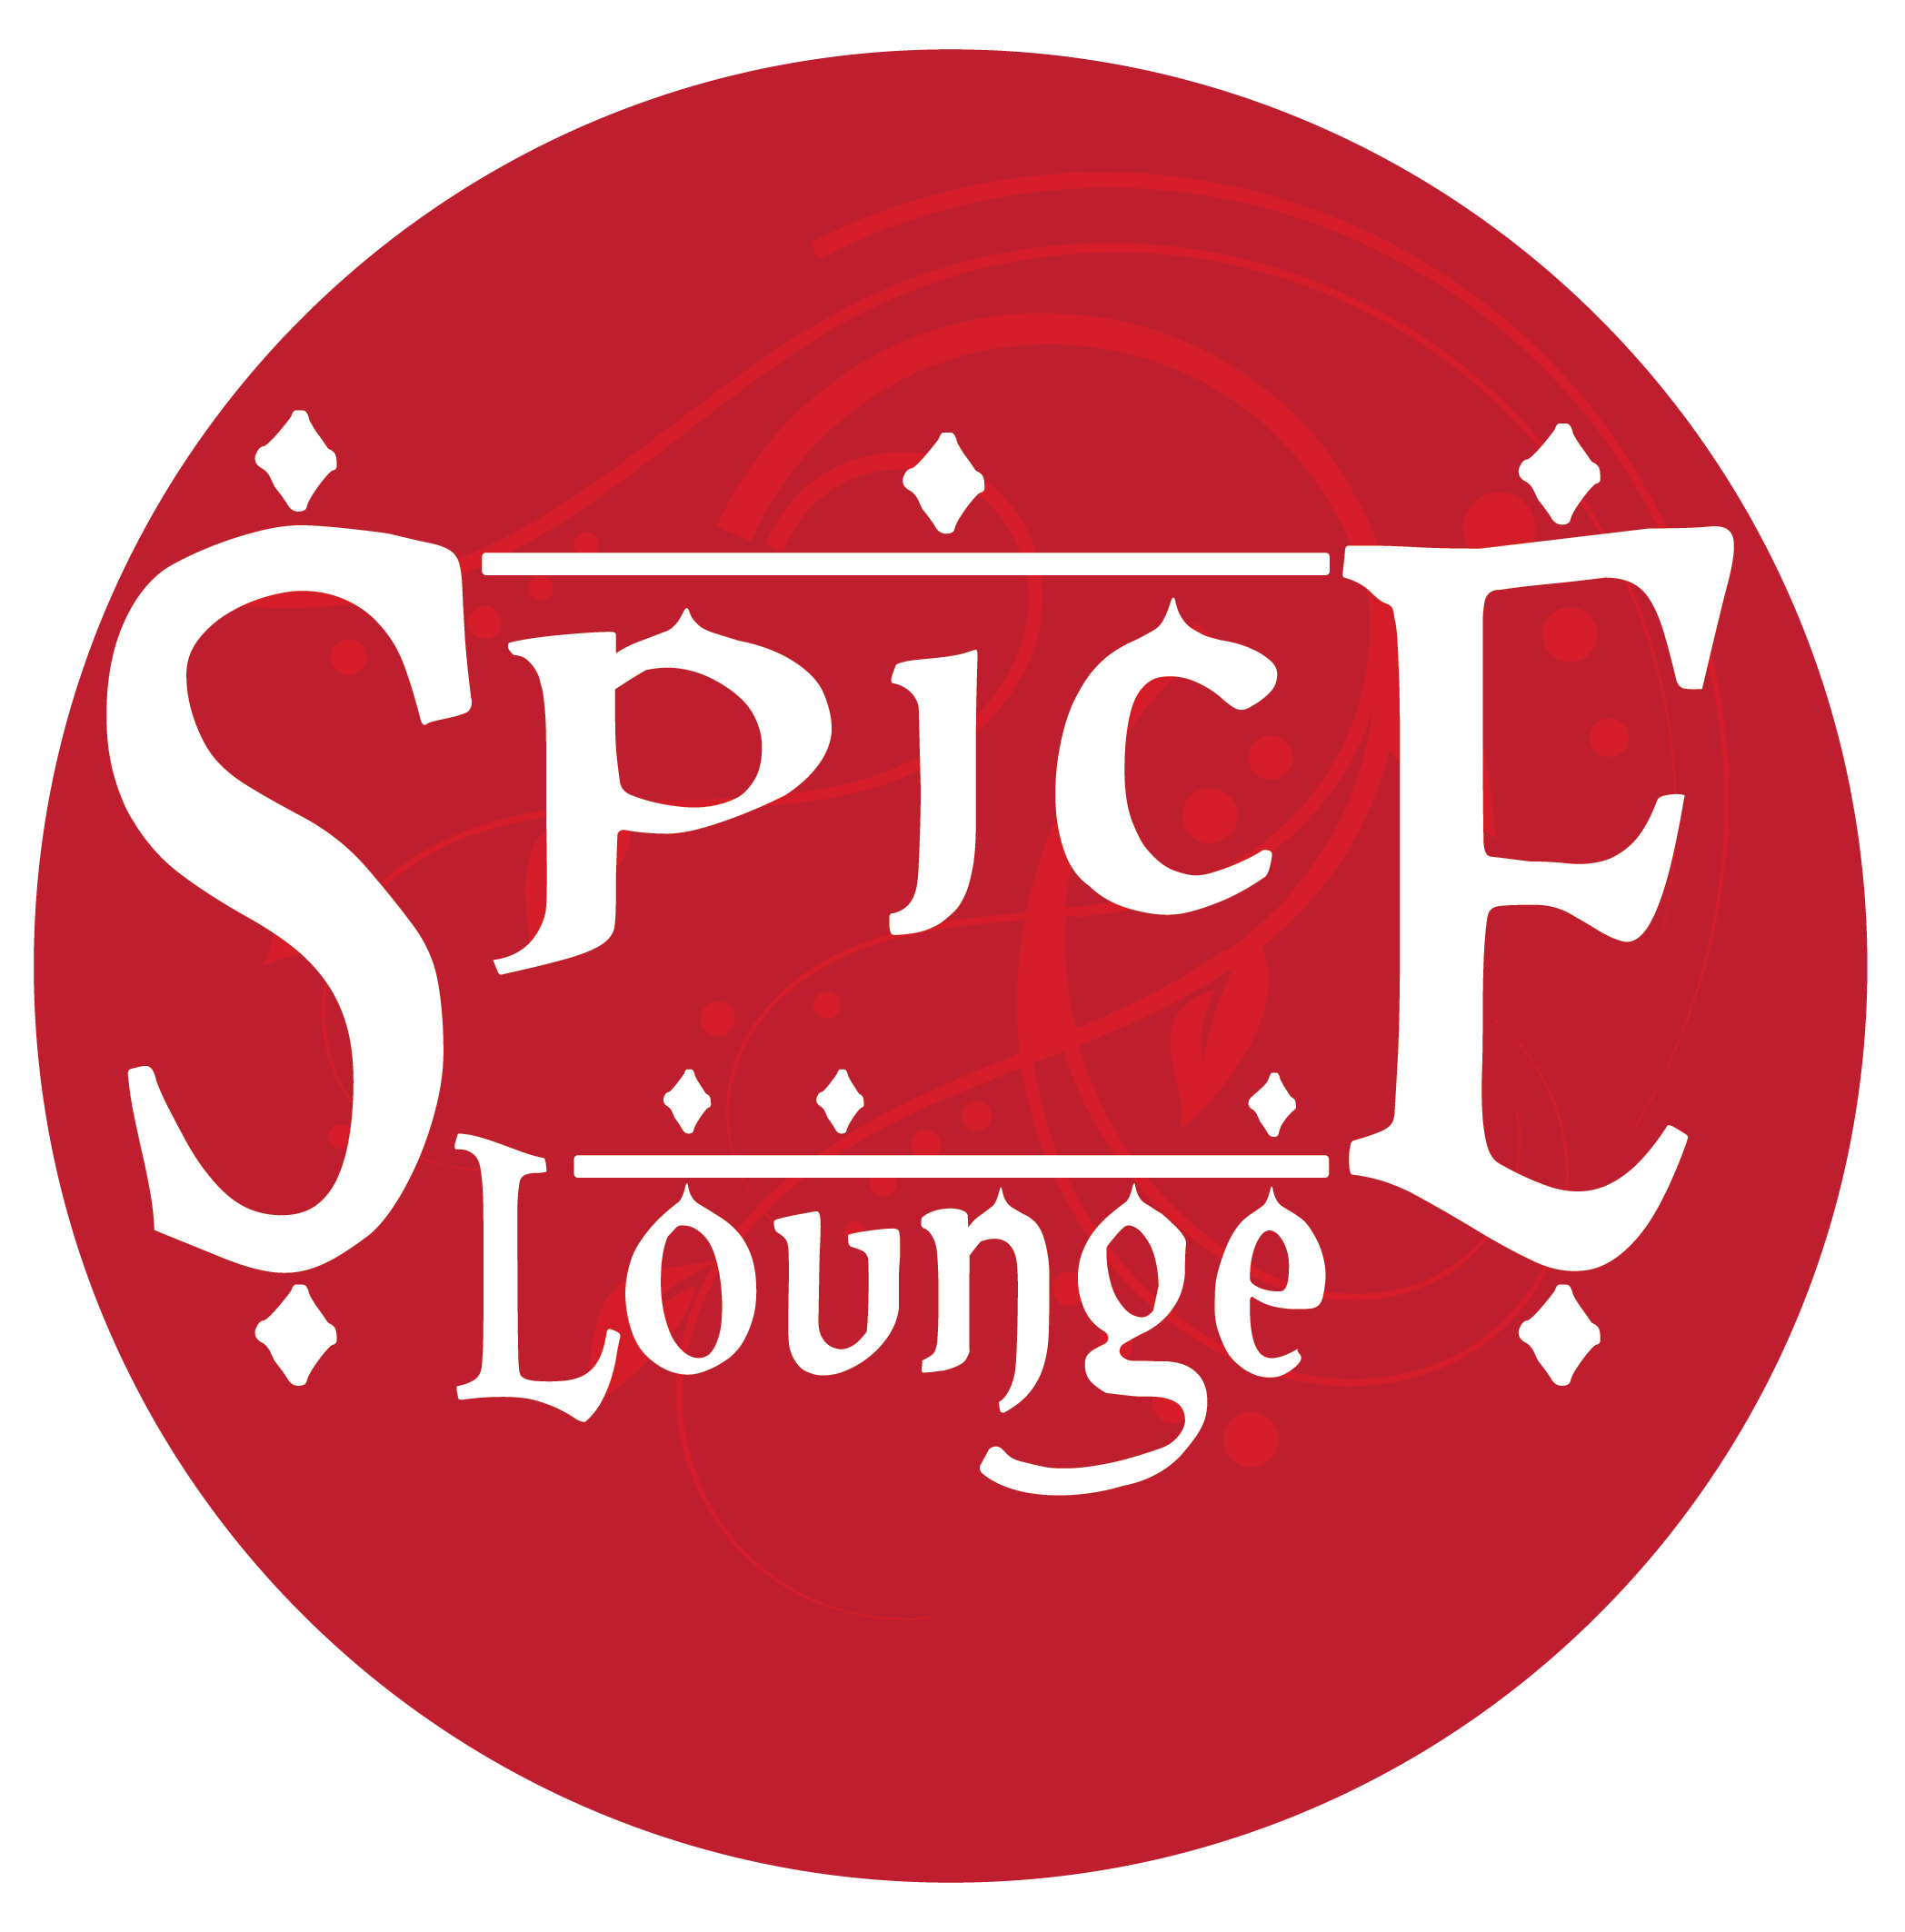 Round Red Restaurant Logo - Spice Lounge. Indian Restaurant and Catering